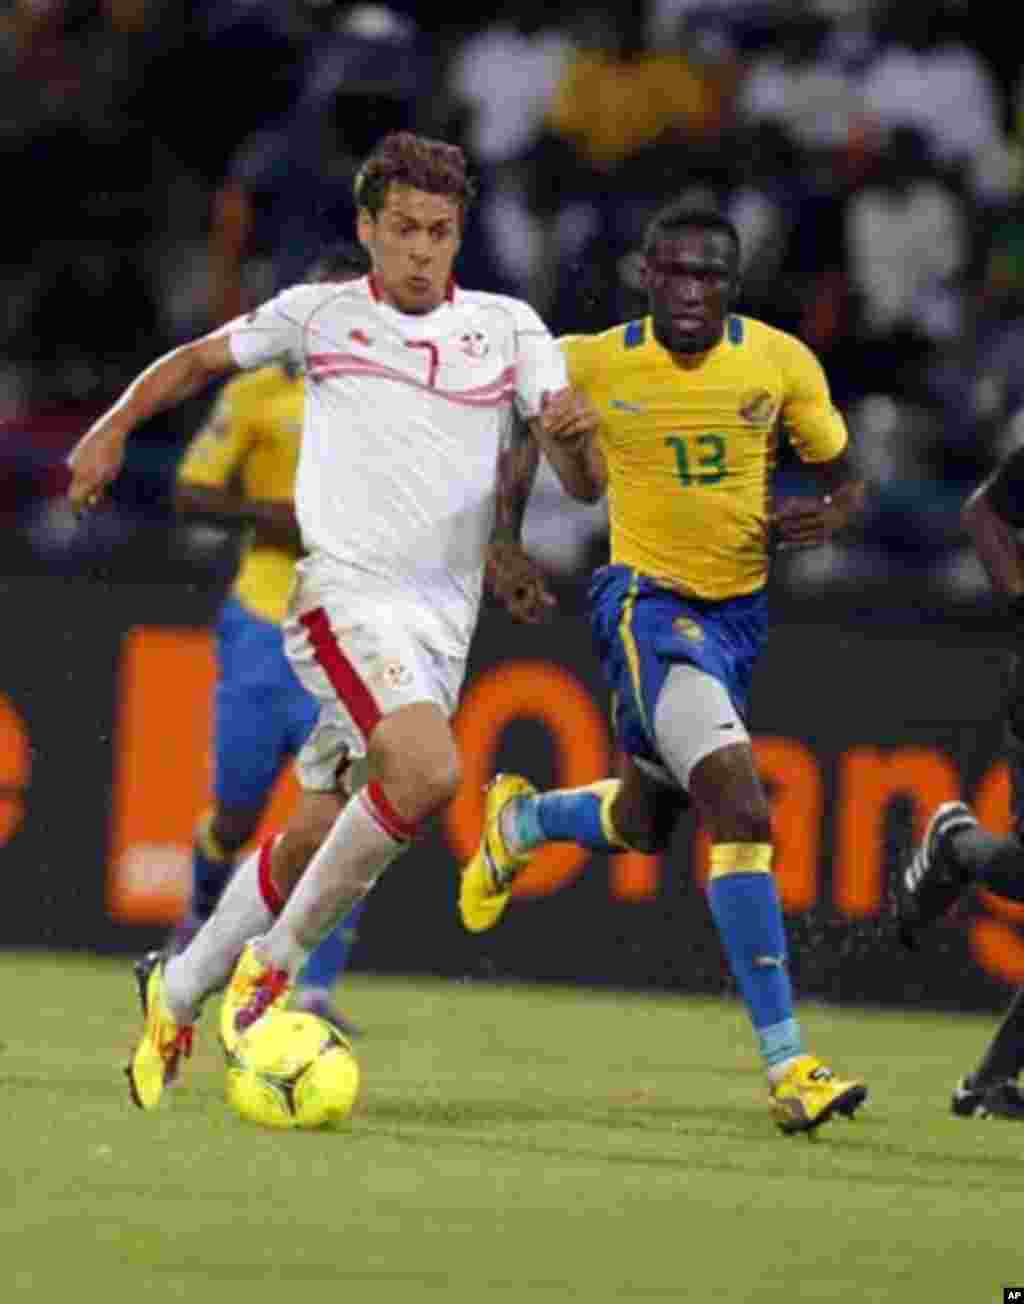 Tunisia's Youssef Msakni (R) challenges Mbanangoye Bruno Zita of Gabon during their African Cup of Nations Group C soccer match at Franceville stadium in Gabon January 31, 2012.